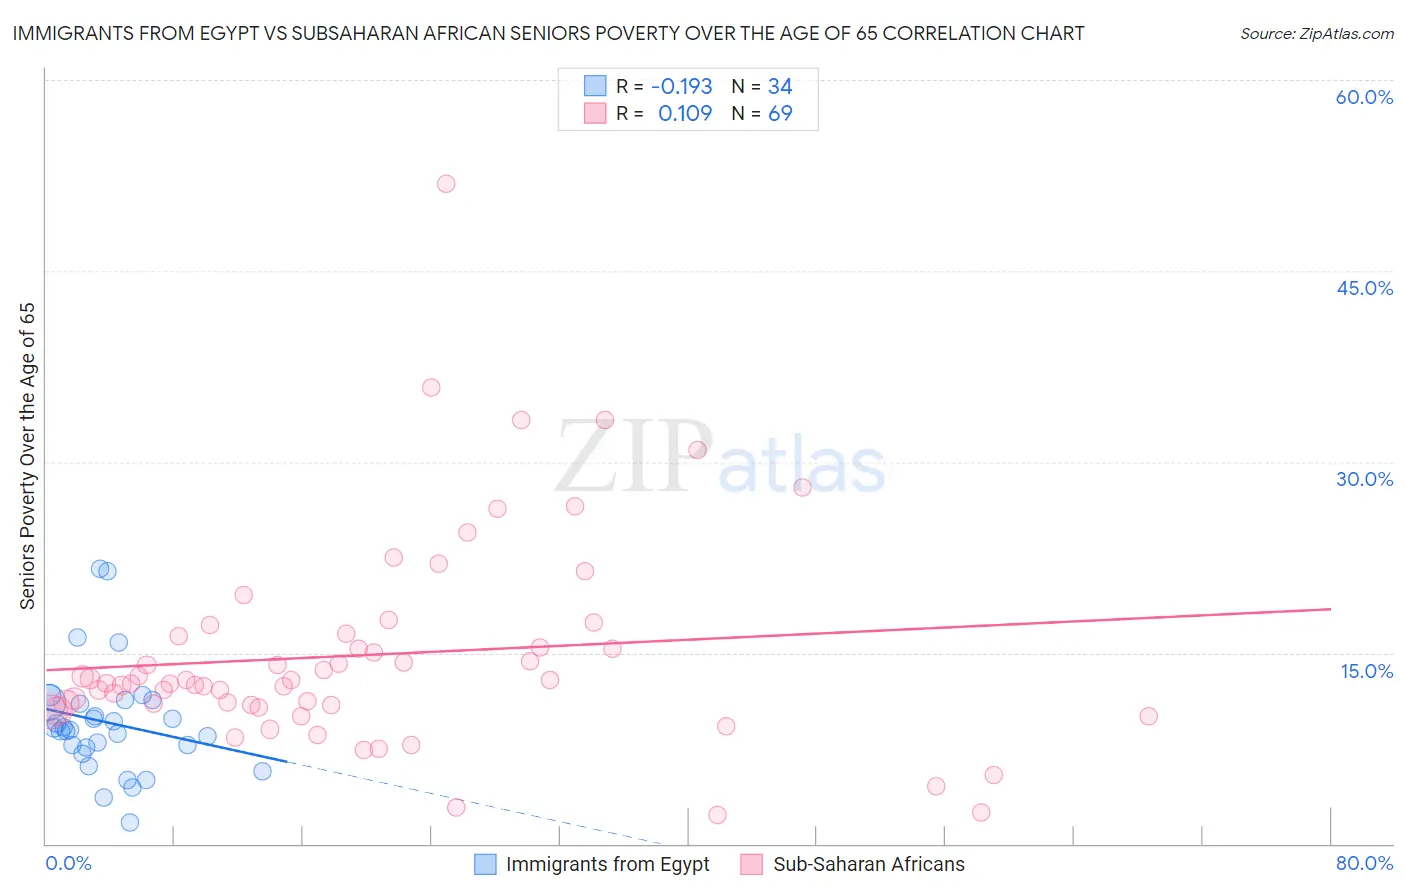 Immigrants from Egypt vs Subsaharan African Seniors Poverty Over the Age of 65